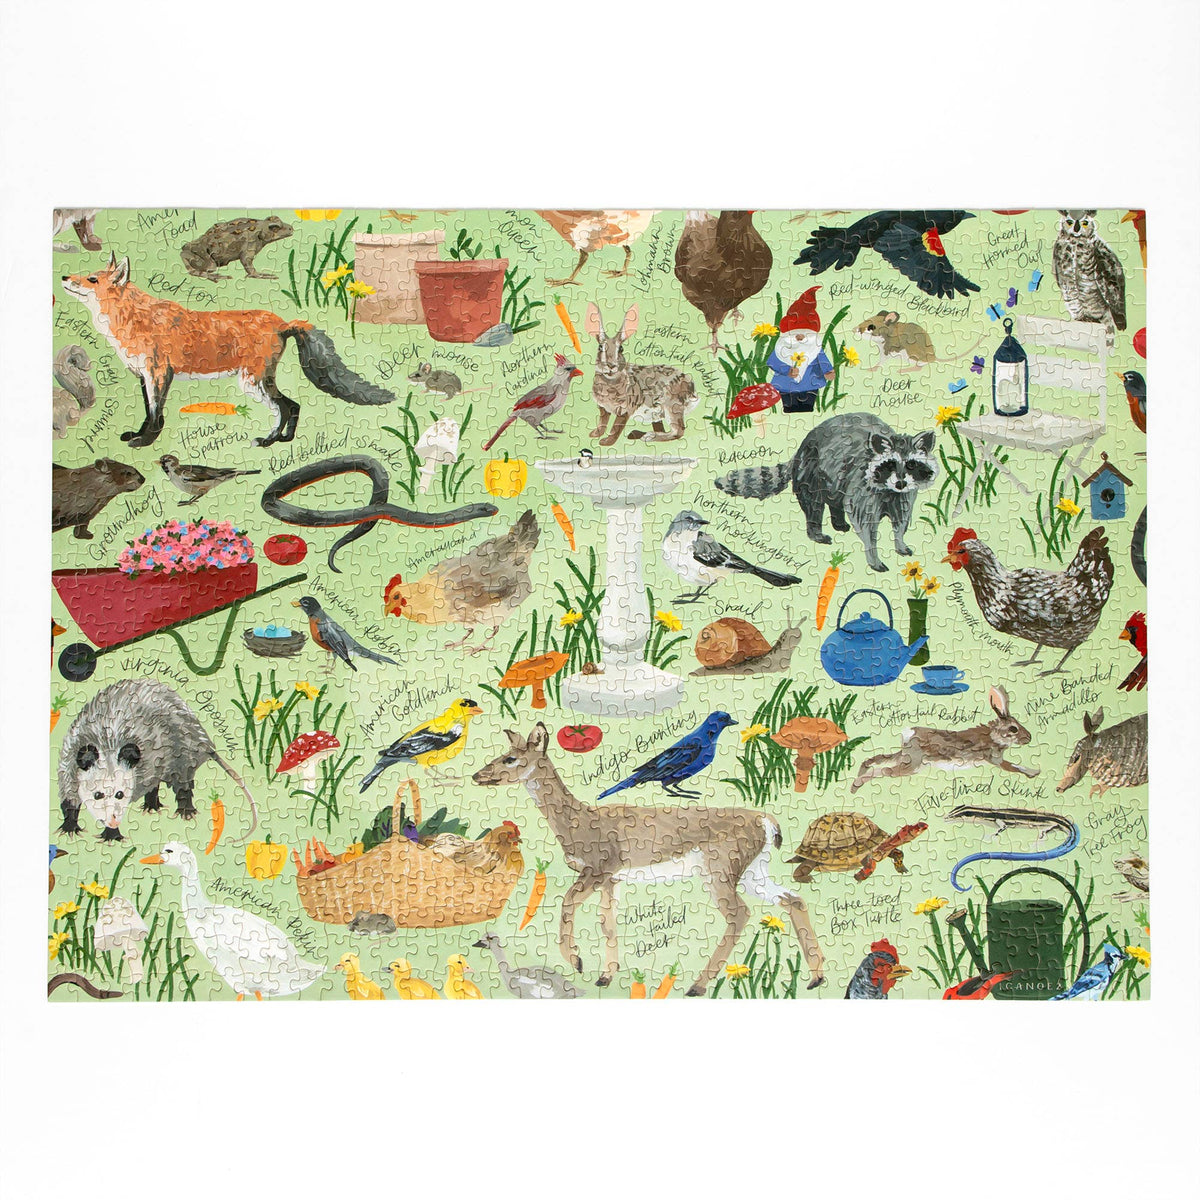 Critters In The Garden - 1000 Piece Jigsaw Puzzle